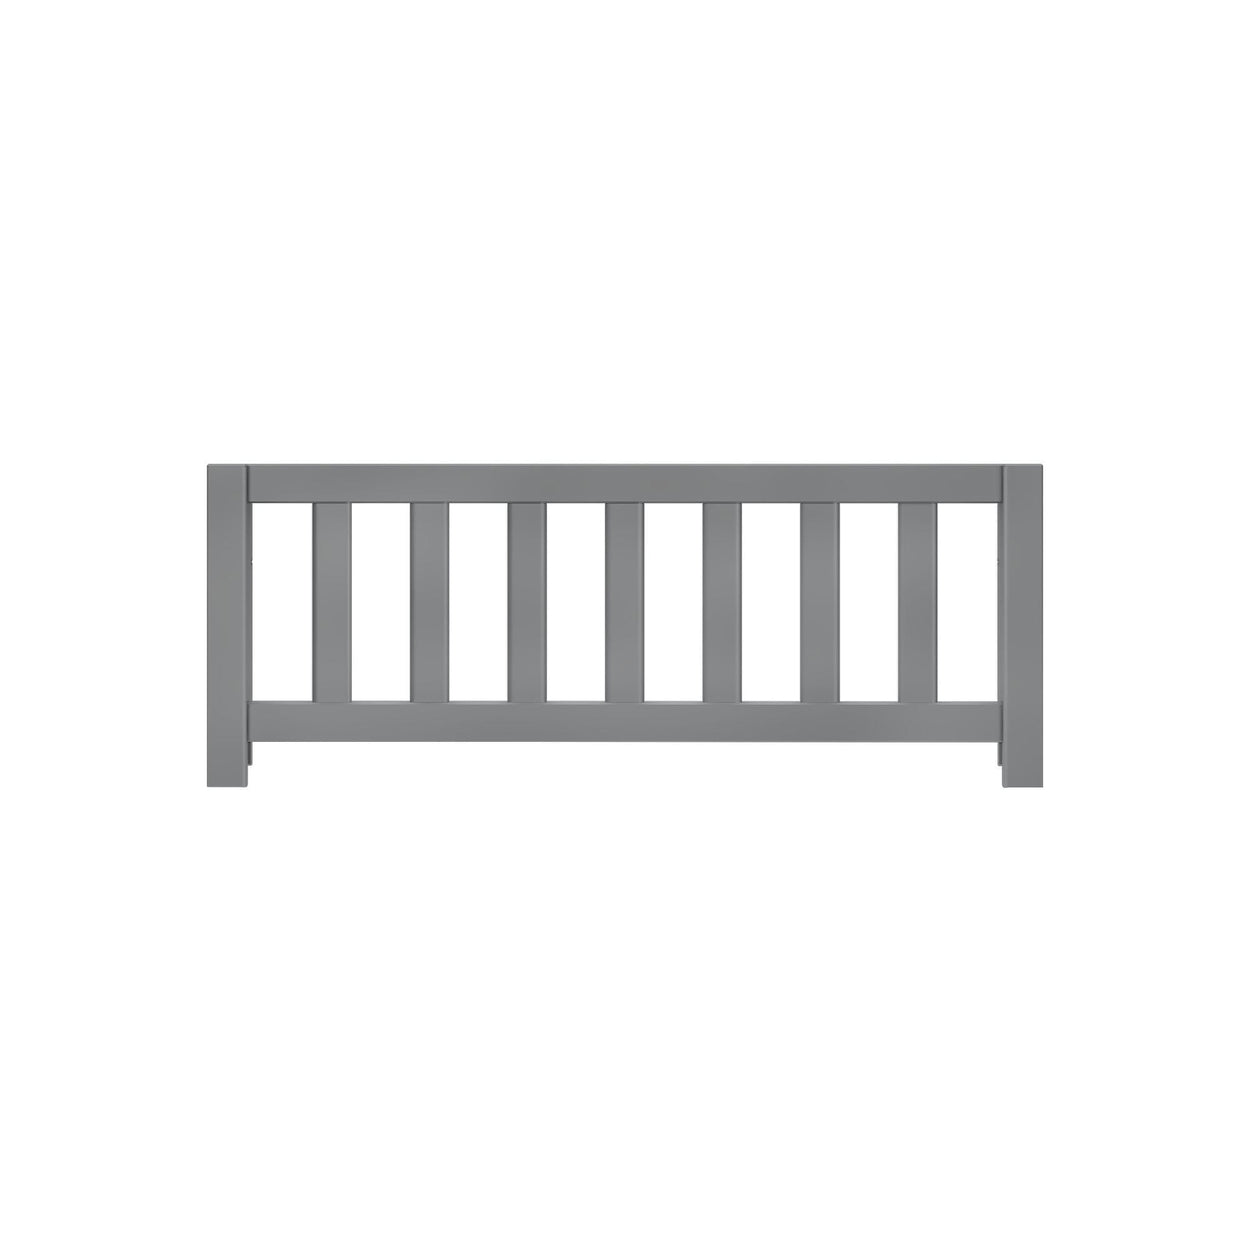 177209-121 : Component Safety Guard Rail, Grey